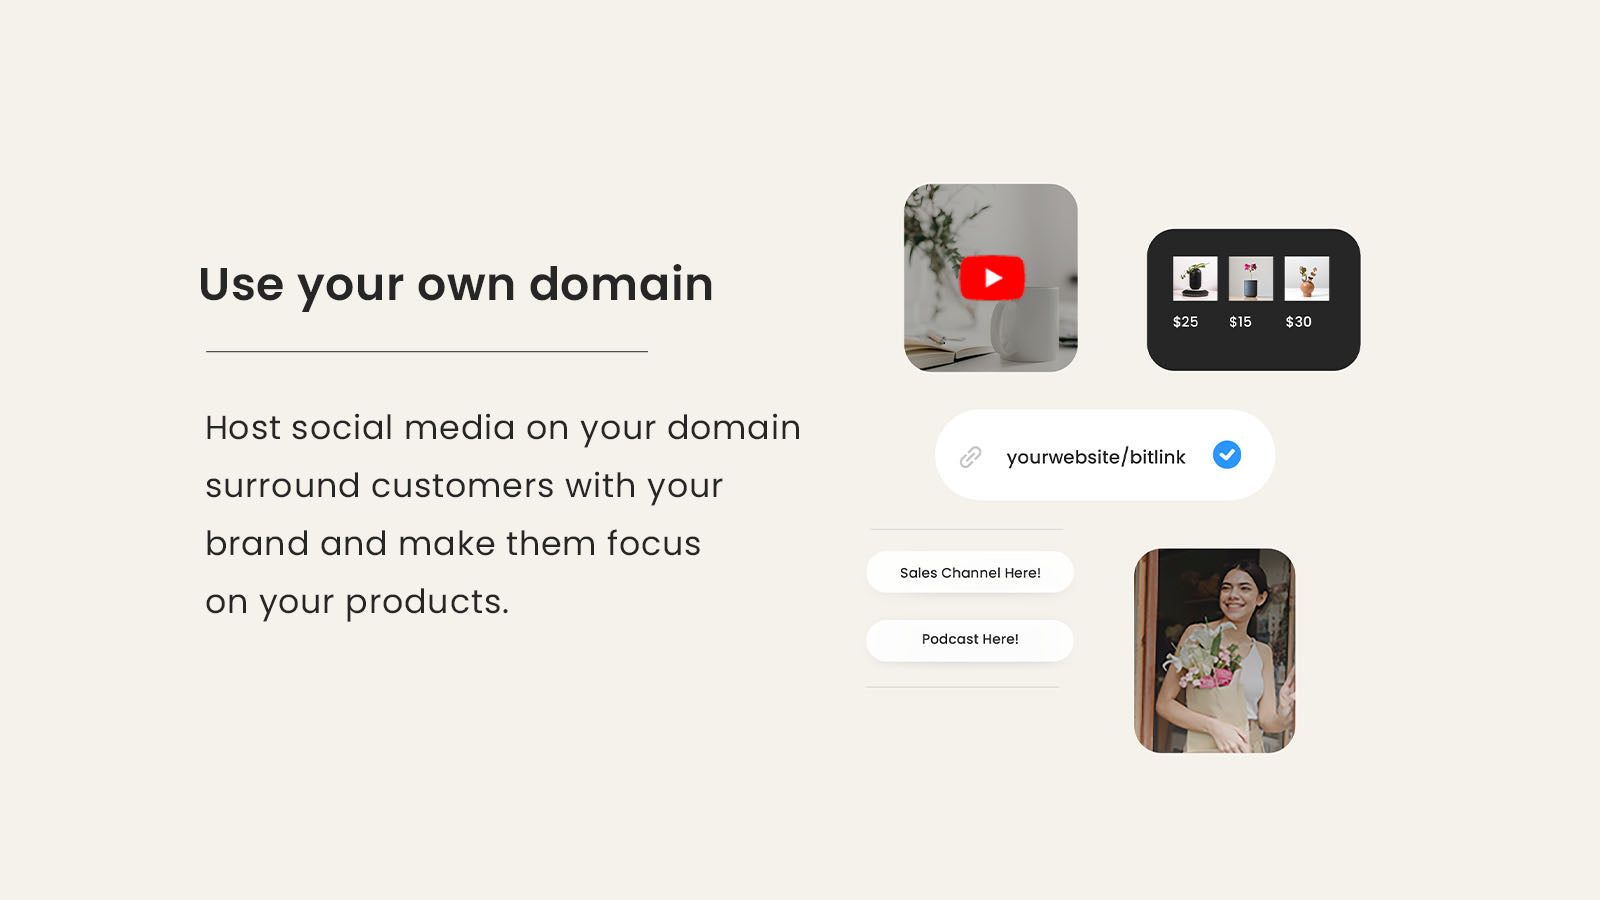 Use your own domain!